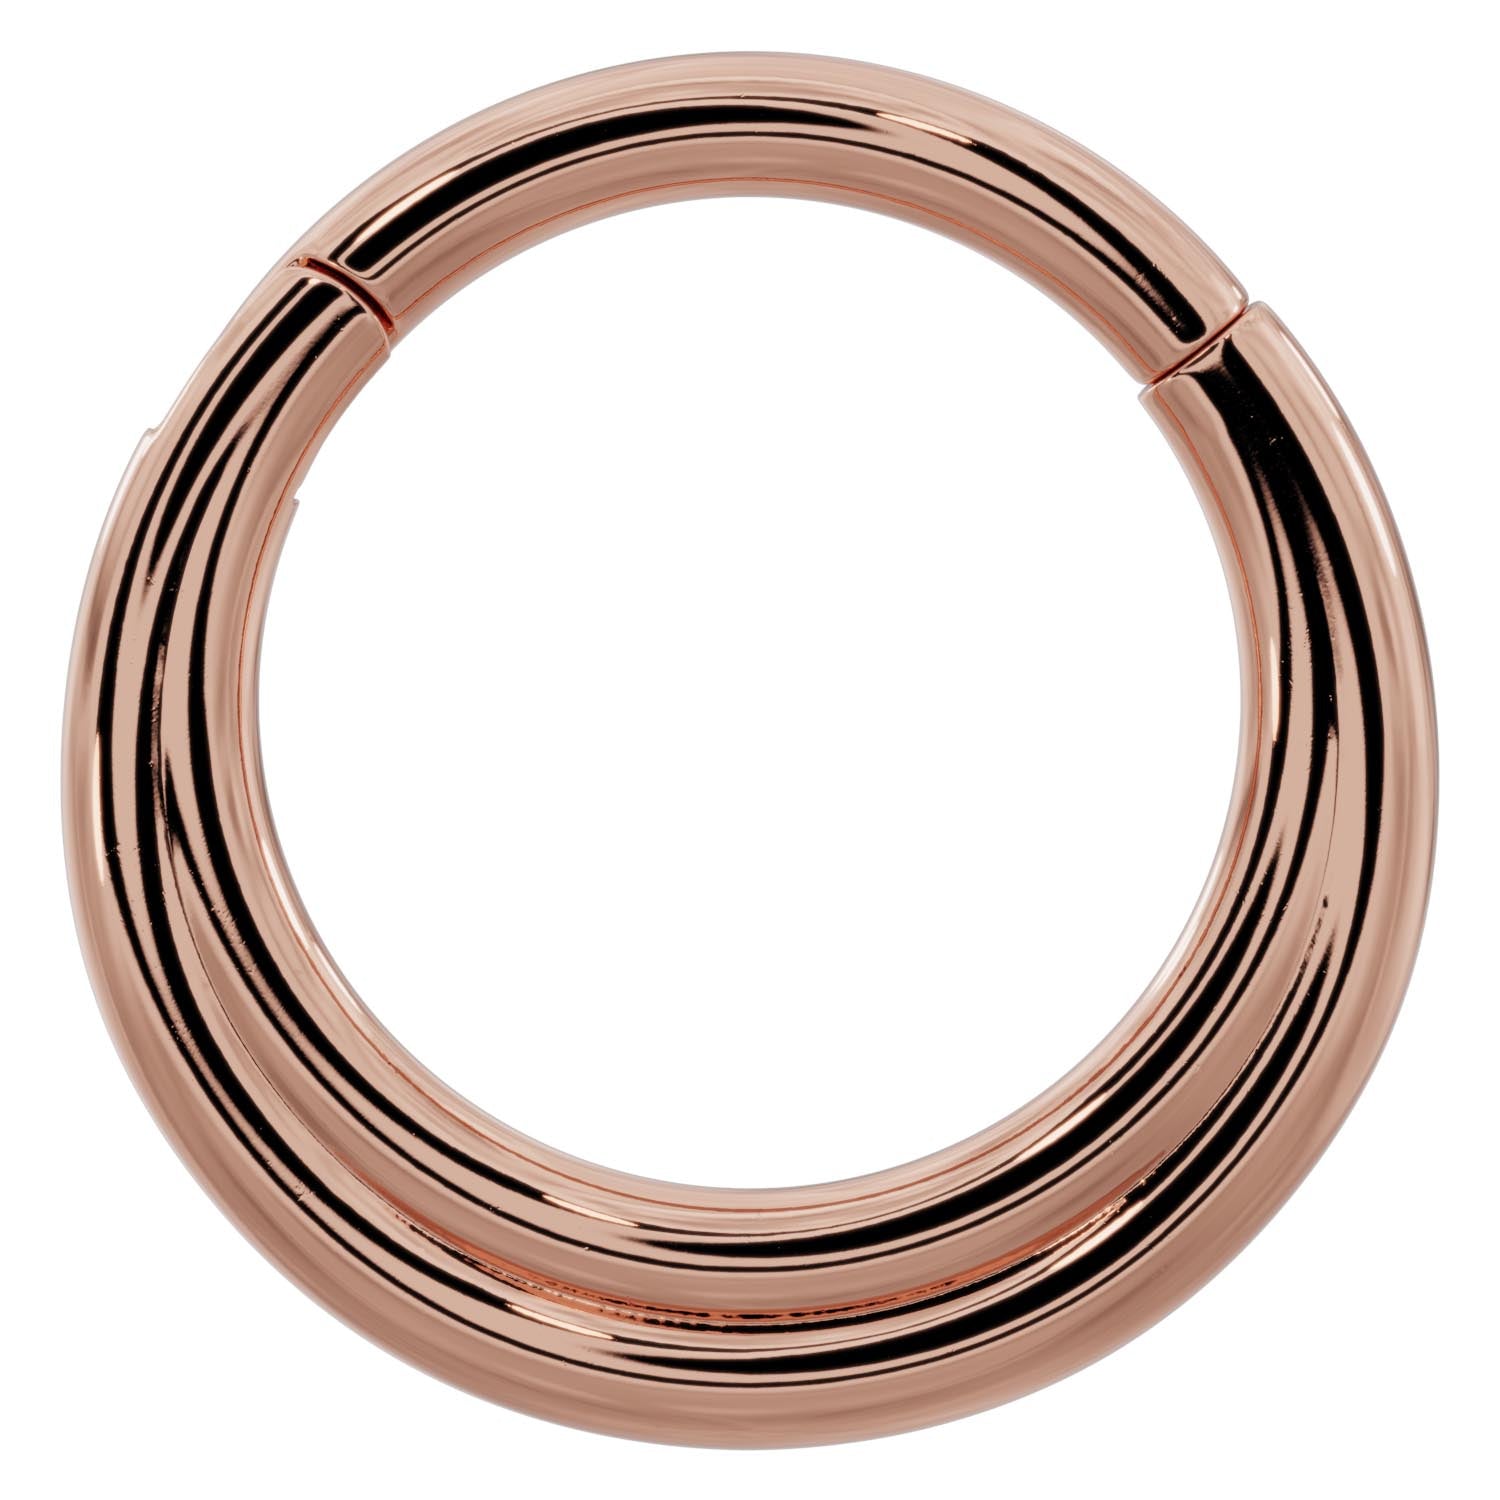 Two Band Eternity 14k Gold Clicker Ring Hoop-14K Rose Gold   16G (1.2mm)   3 8